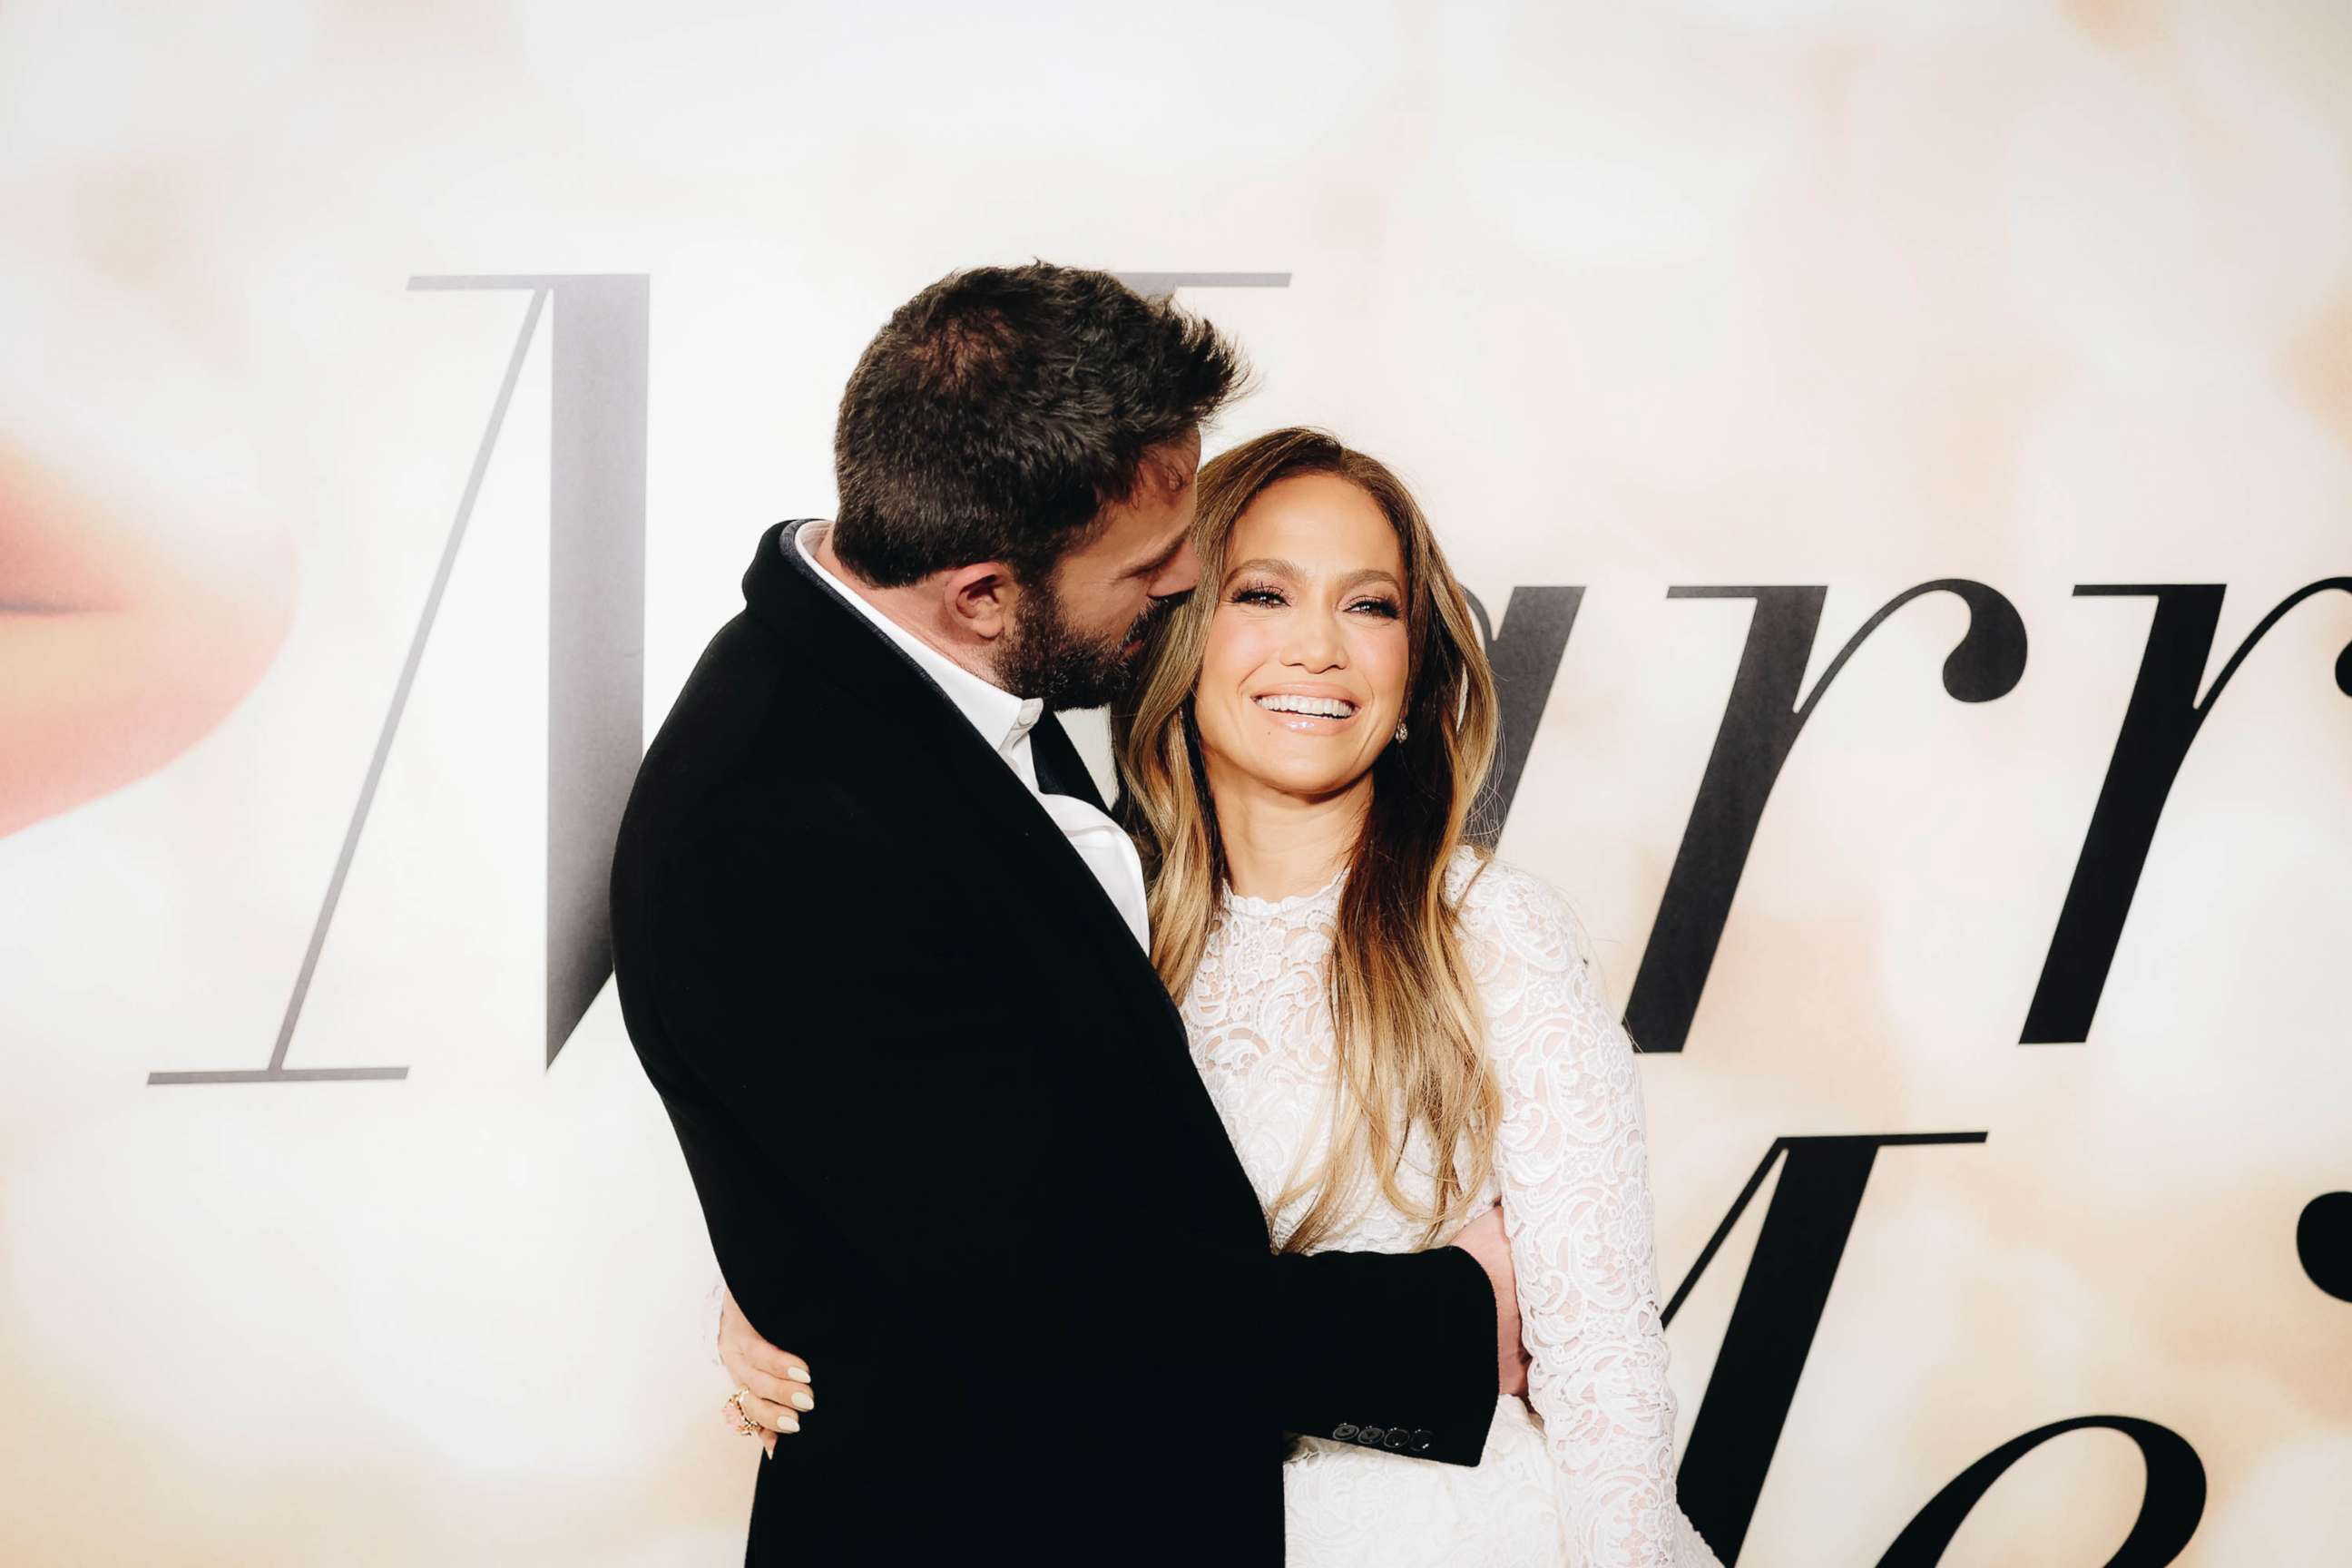 PHOTO: Ben Affleck and Jennifer Lopez attend the Los Angeles special screening of "Marry Me" on Feb. 8, 2022 in Los Angeles.